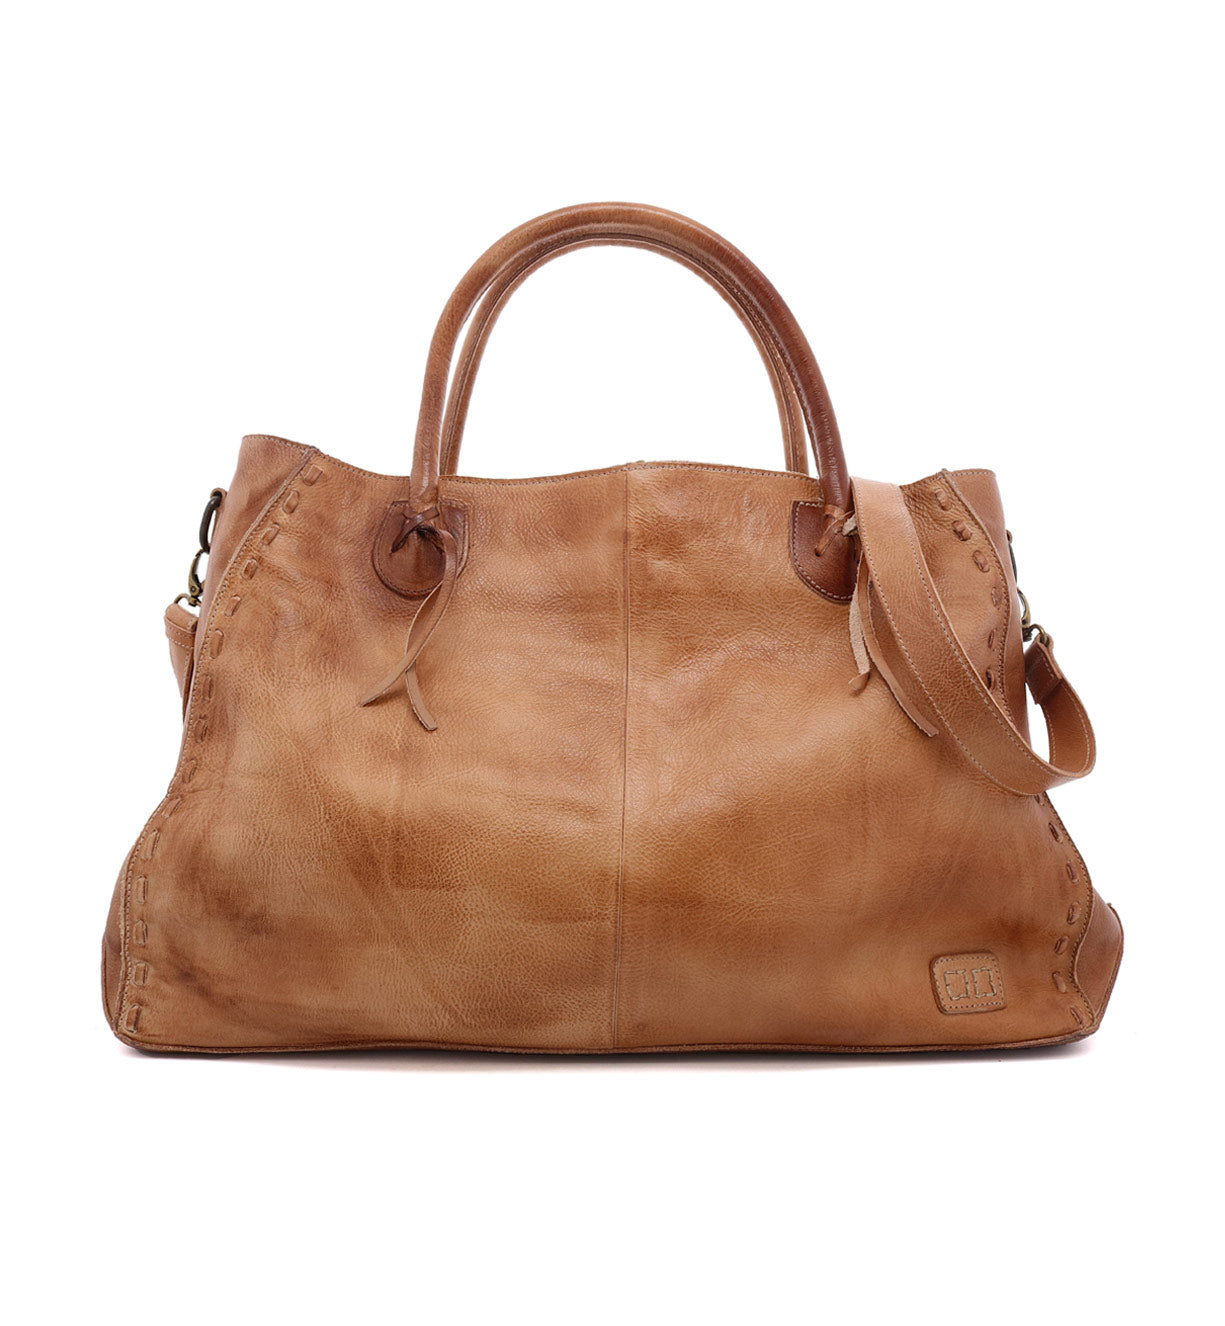 A Rockaway leather bag with two handles by Bed Stu.